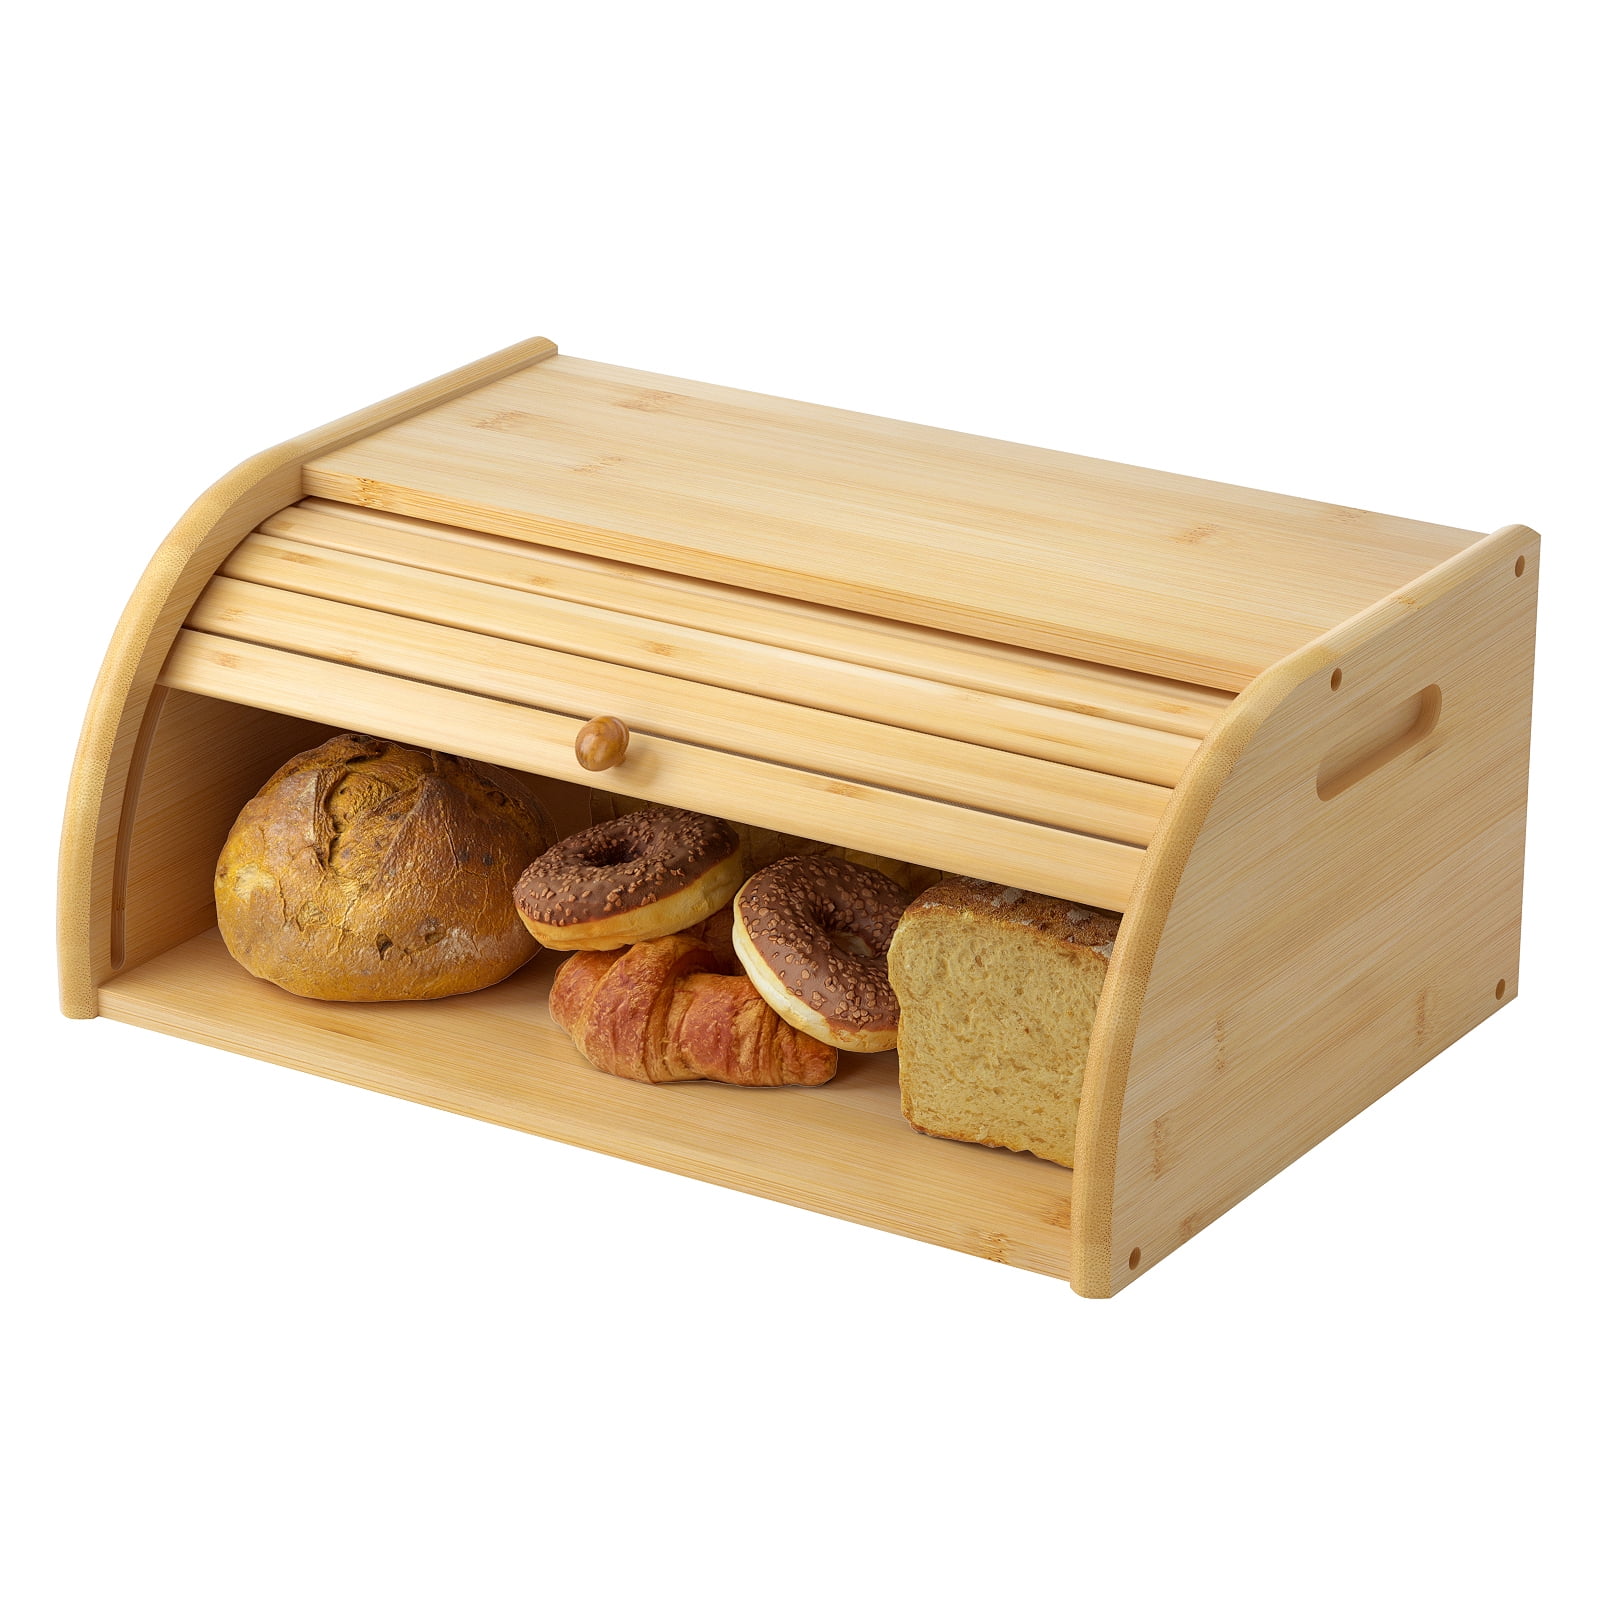 G.a HOMEFAVOR Bread Box with Roll Top, Bamboo Bread Bin for Kitchen Counter, Kitchen Food Storage - Walmart.com